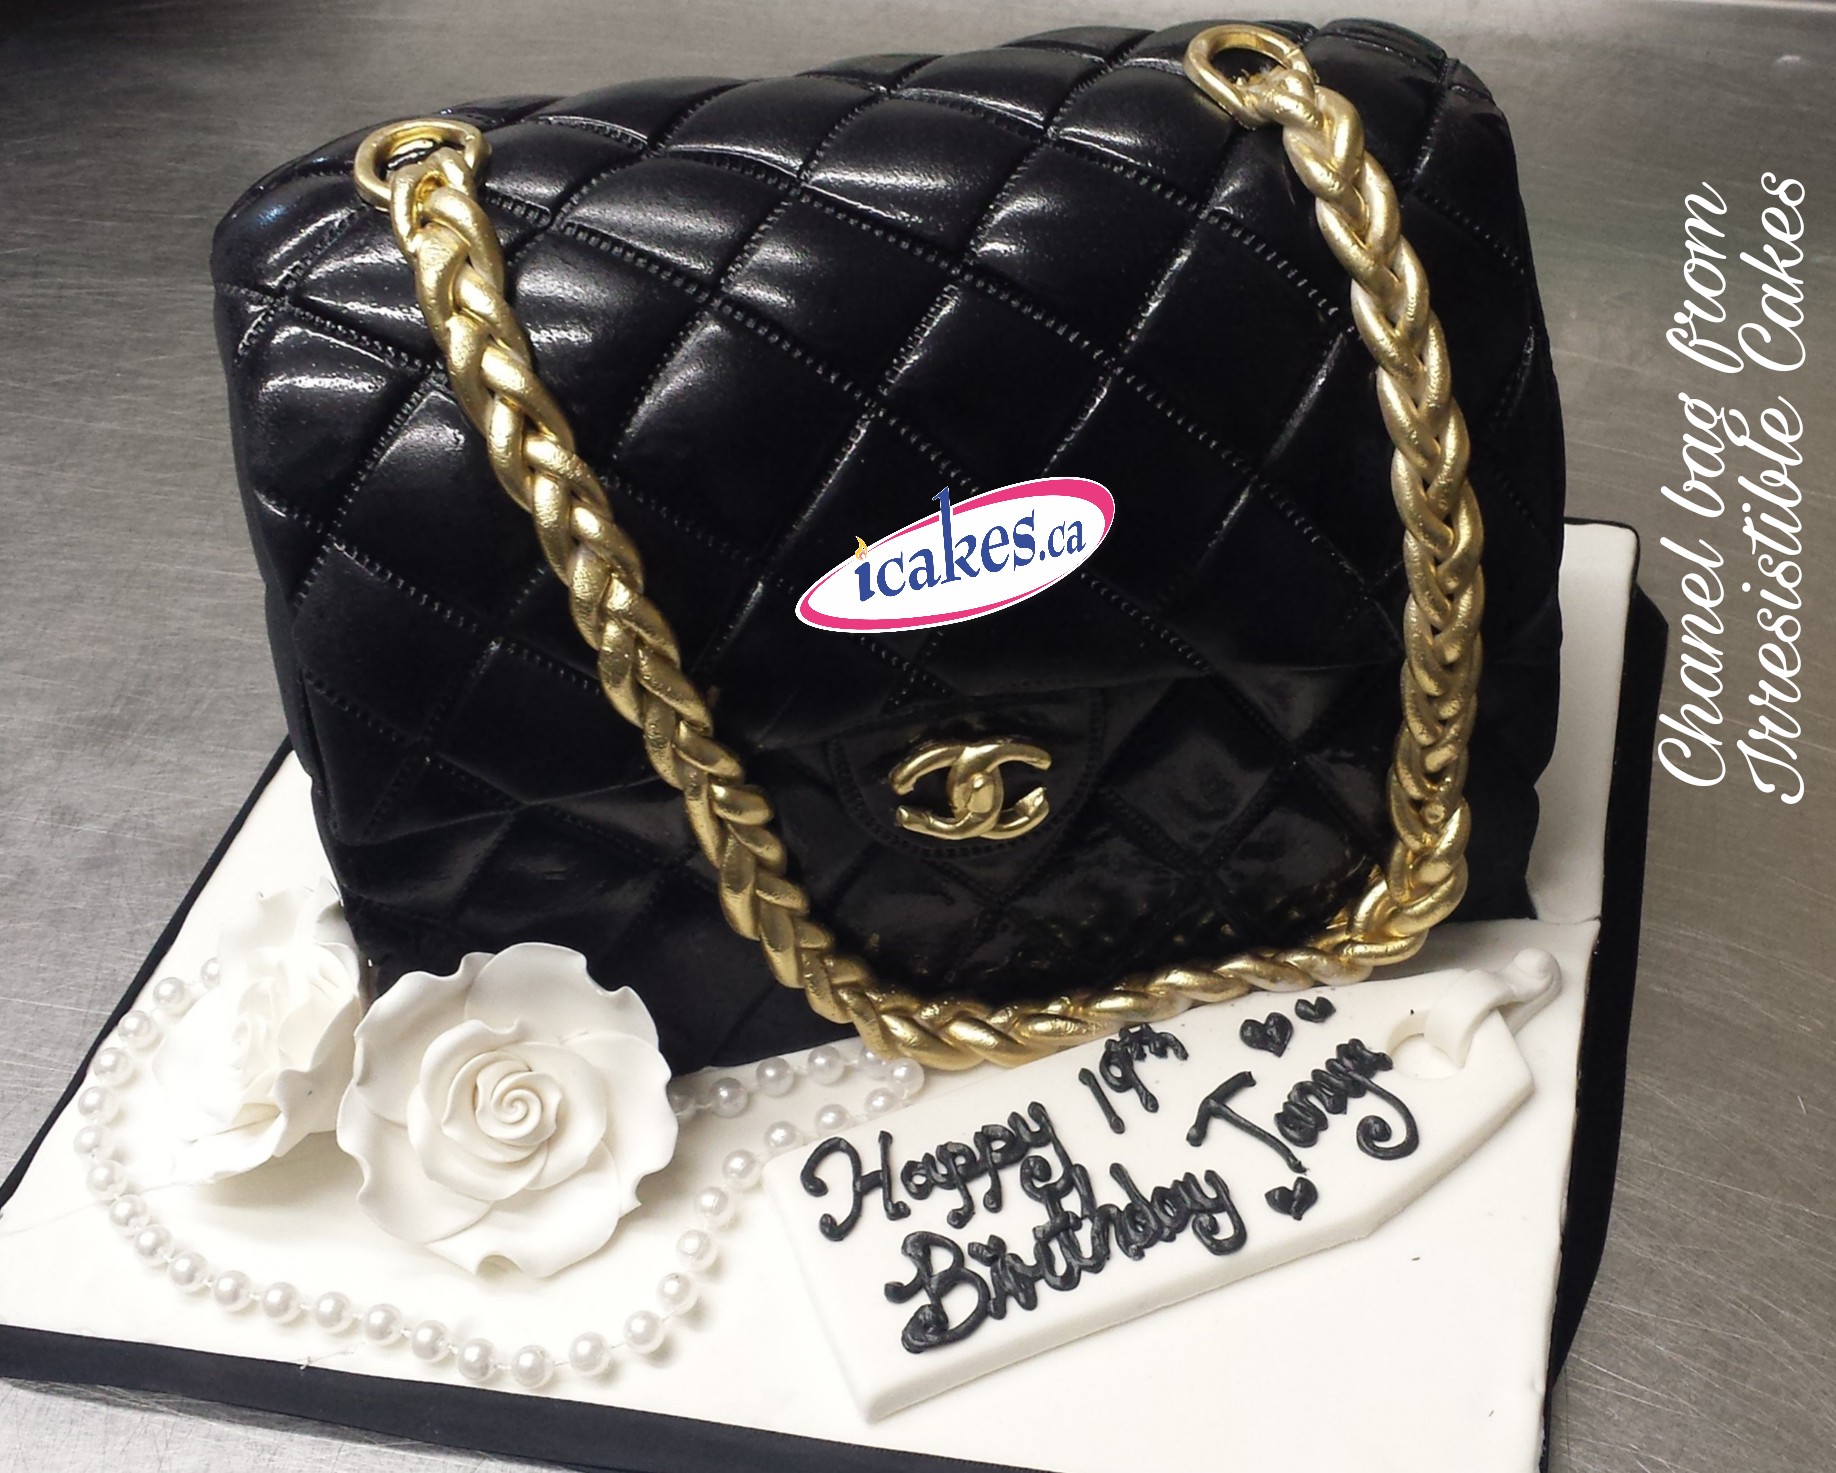 Chanel and Louis Vuitton Cake